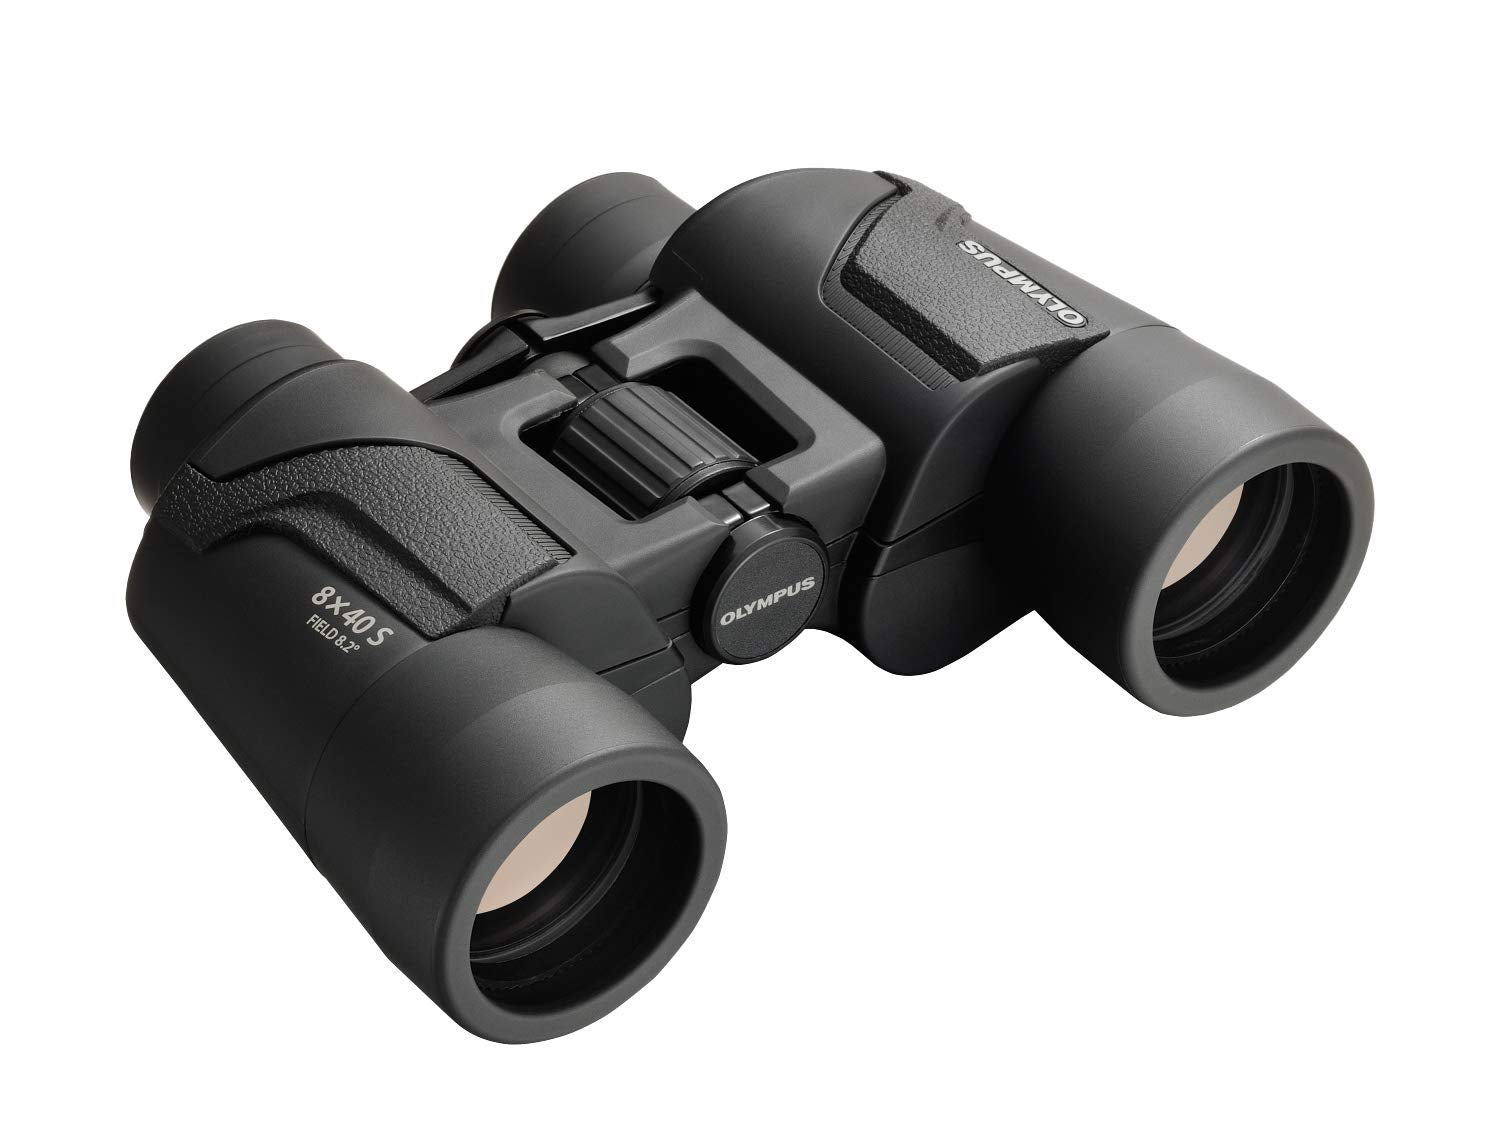 Olympus Binocular 8x40 S - Ideal for Nature Observation, Wildlife, Birdwatching, Sports, Concerts , Black